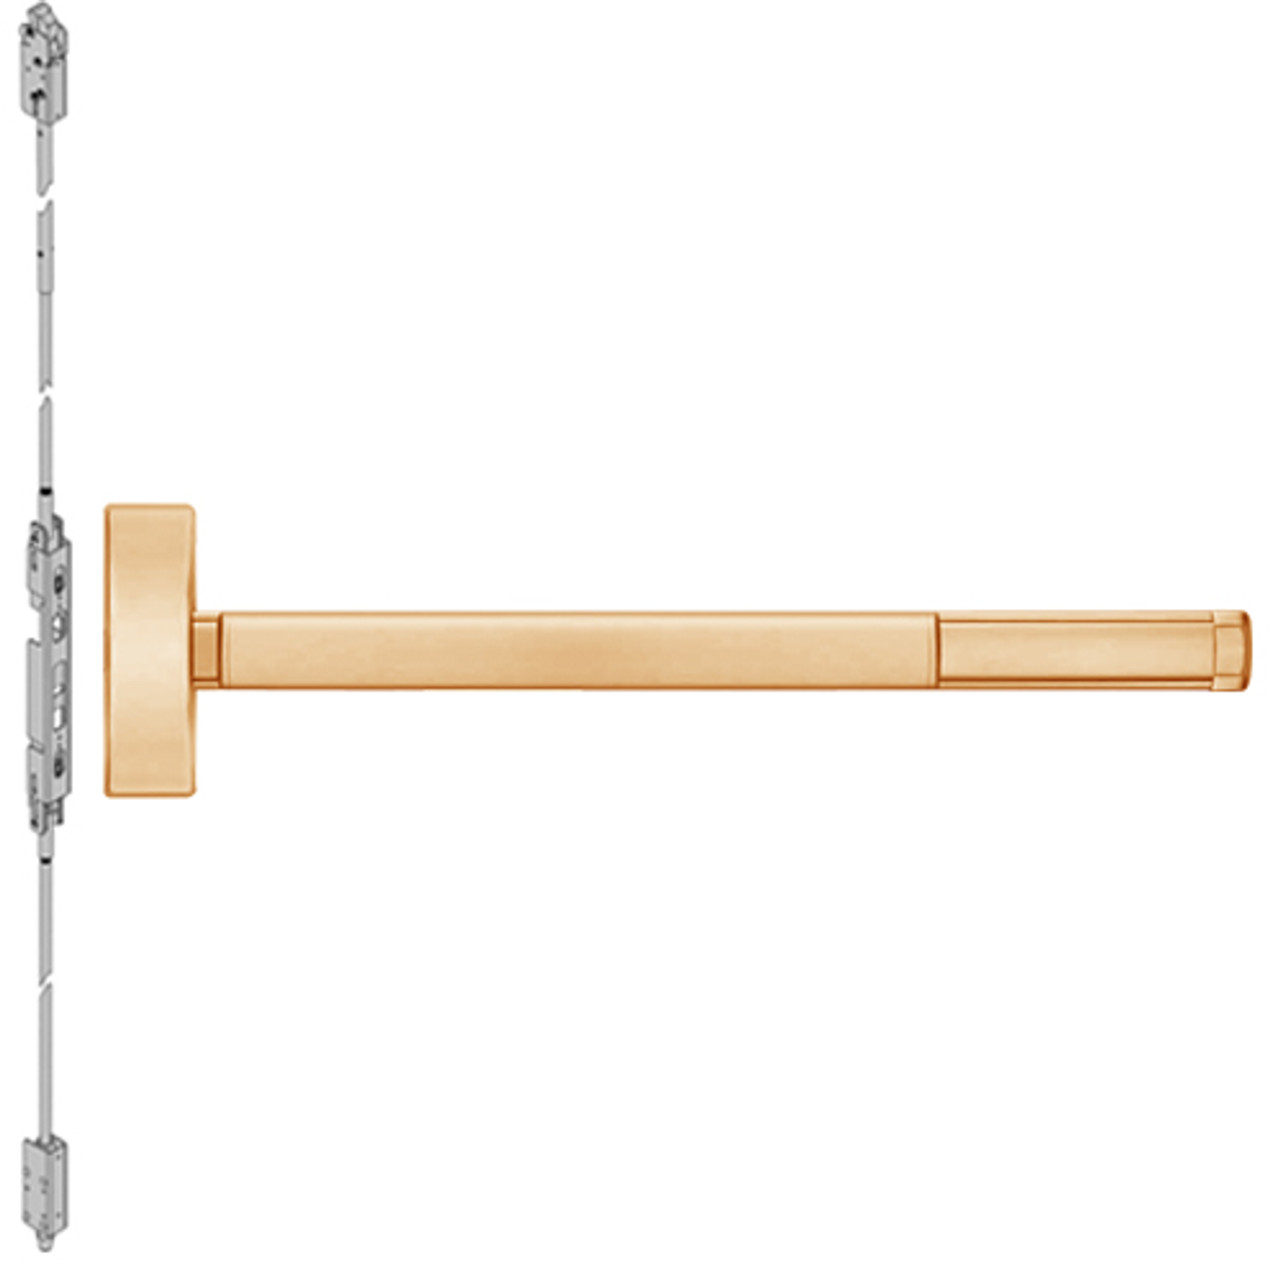 DEFL2808-612-36 PHI 2800 Series Fire Rated Concealed Vertical Rod Exit Device with Delayed Egress Prepped for Key Controls Lever-Knob in Satin Bronze Finish